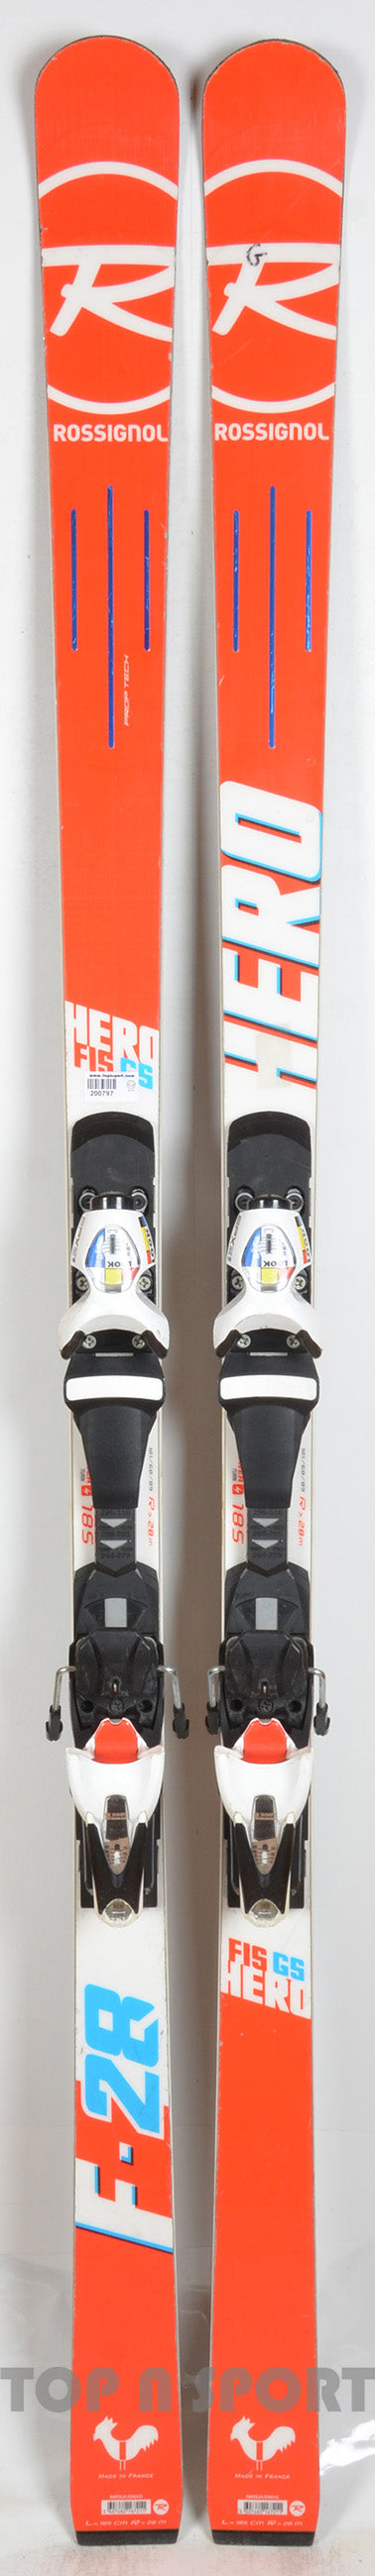 Rossignol HERO FIS GS WC - skis d'occasion